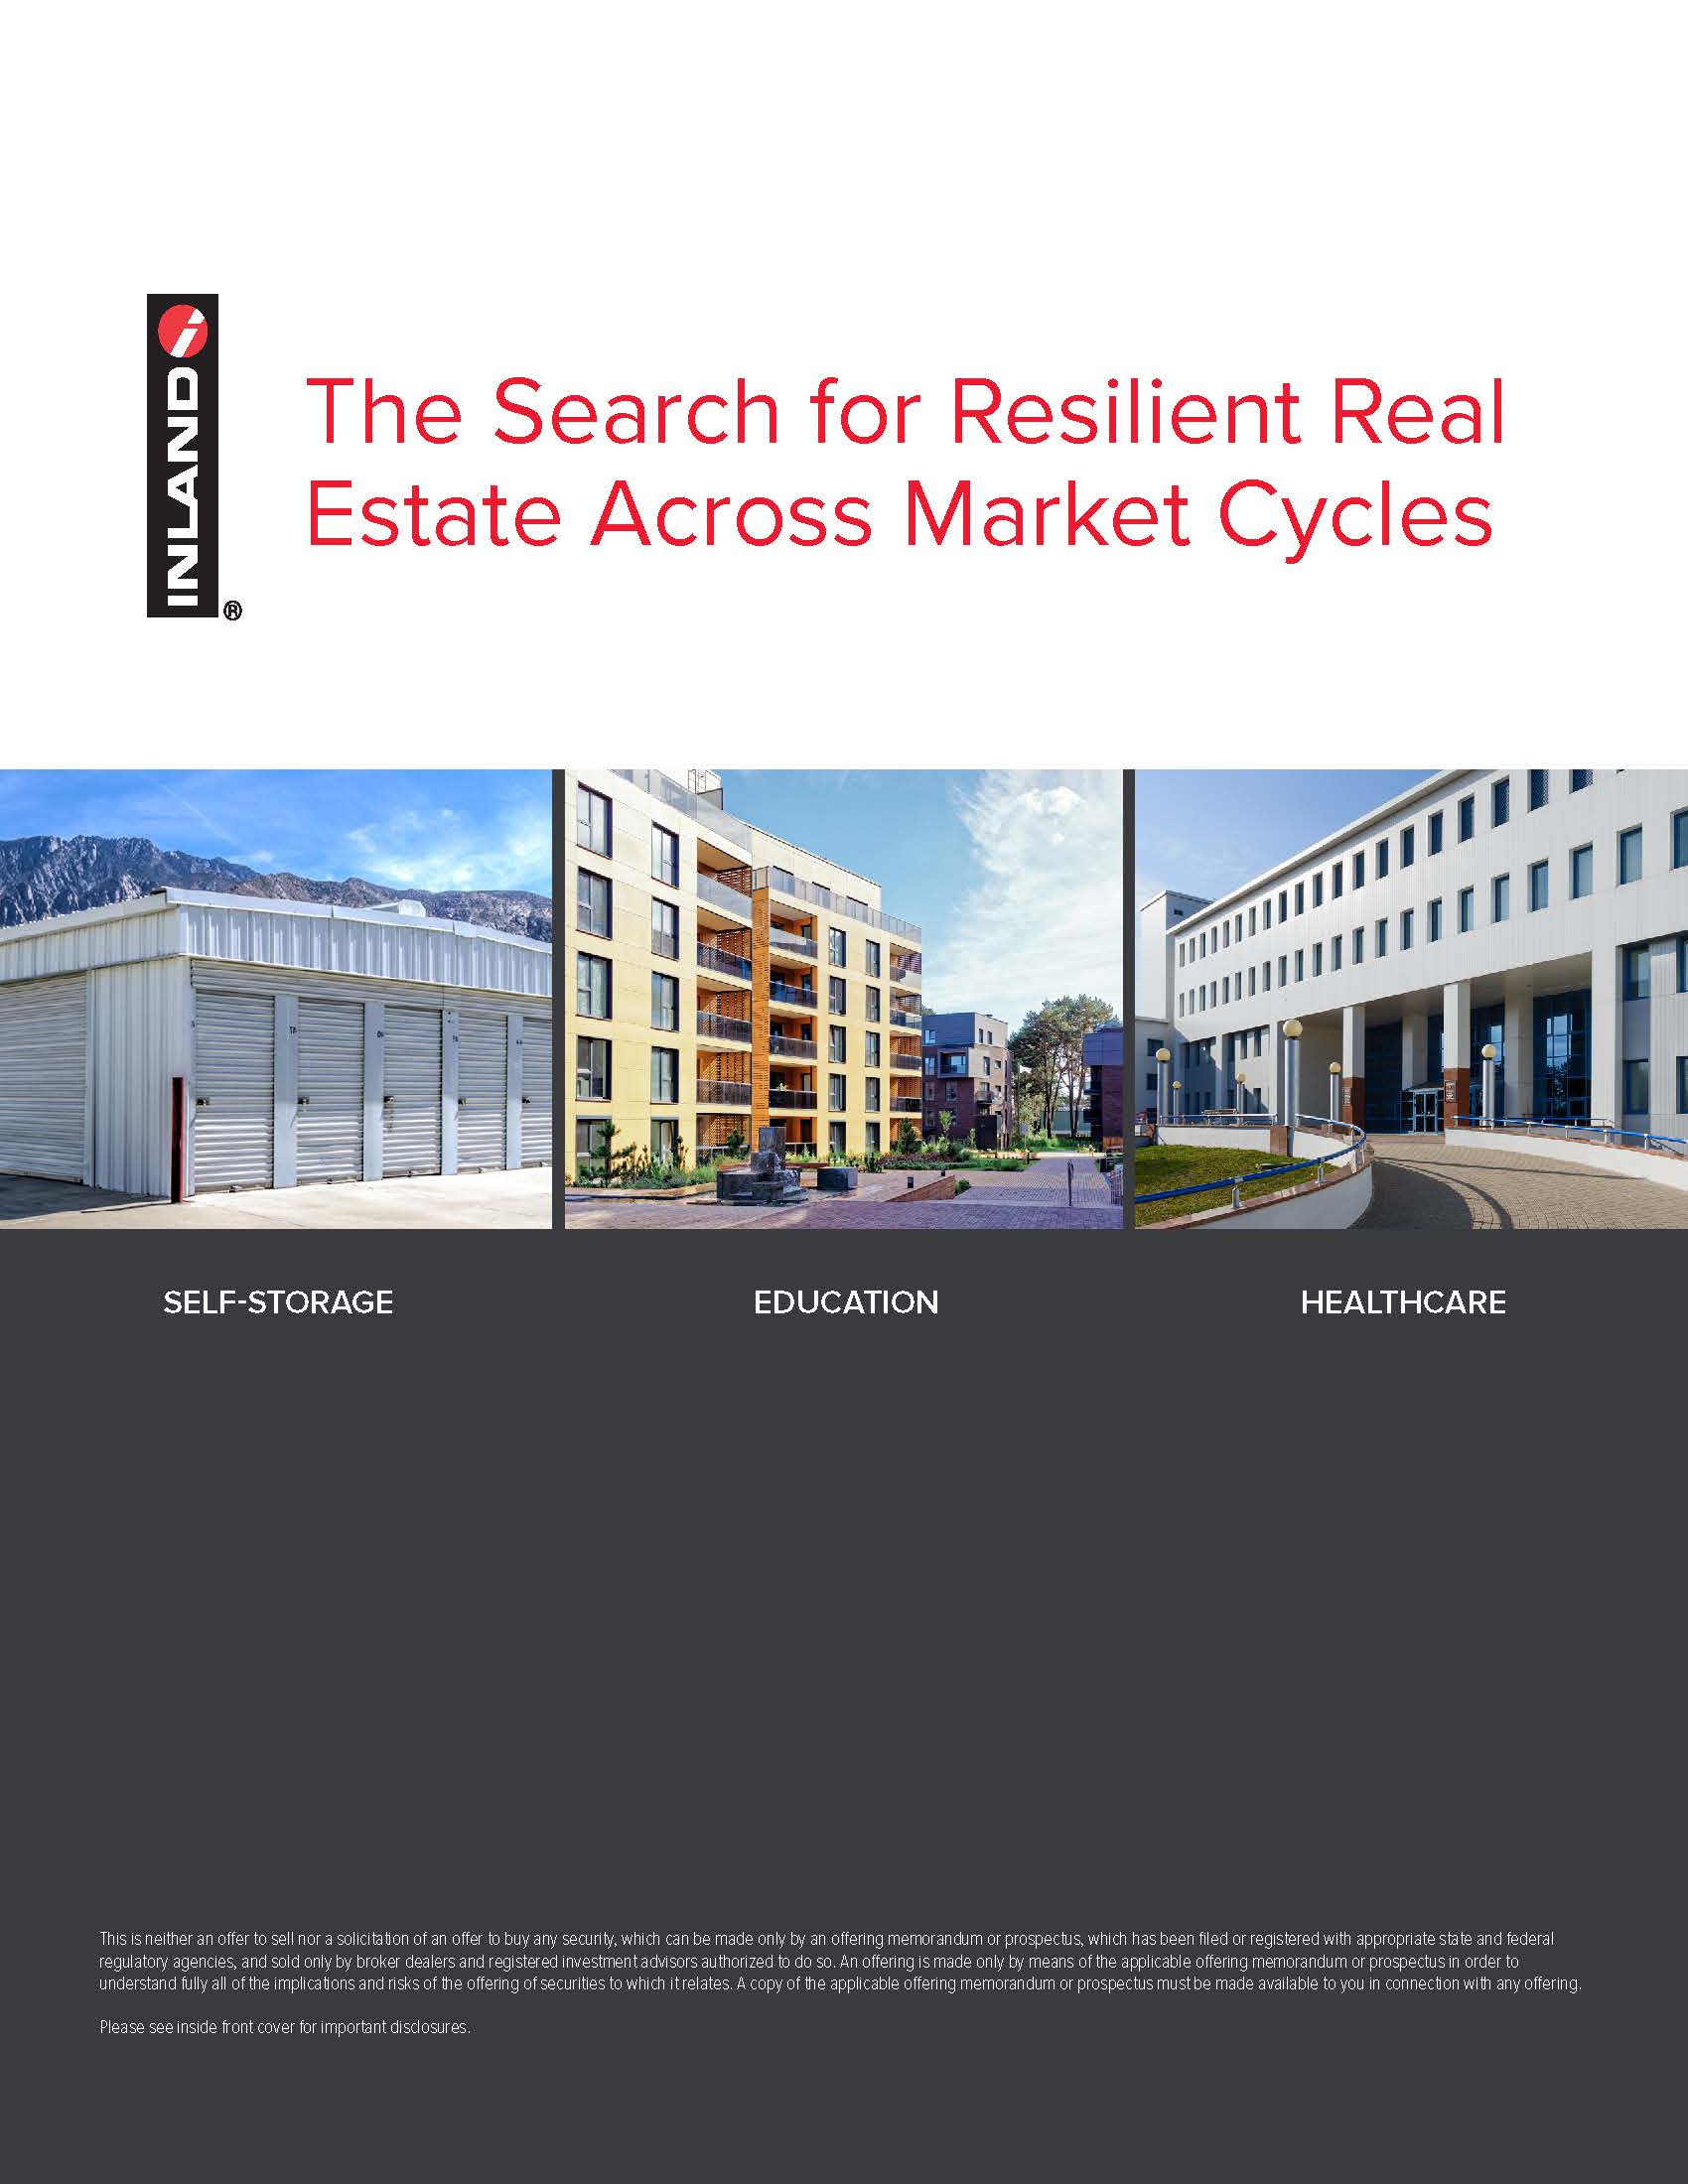 The Search for Resilient Real Estate Across Market Cycles